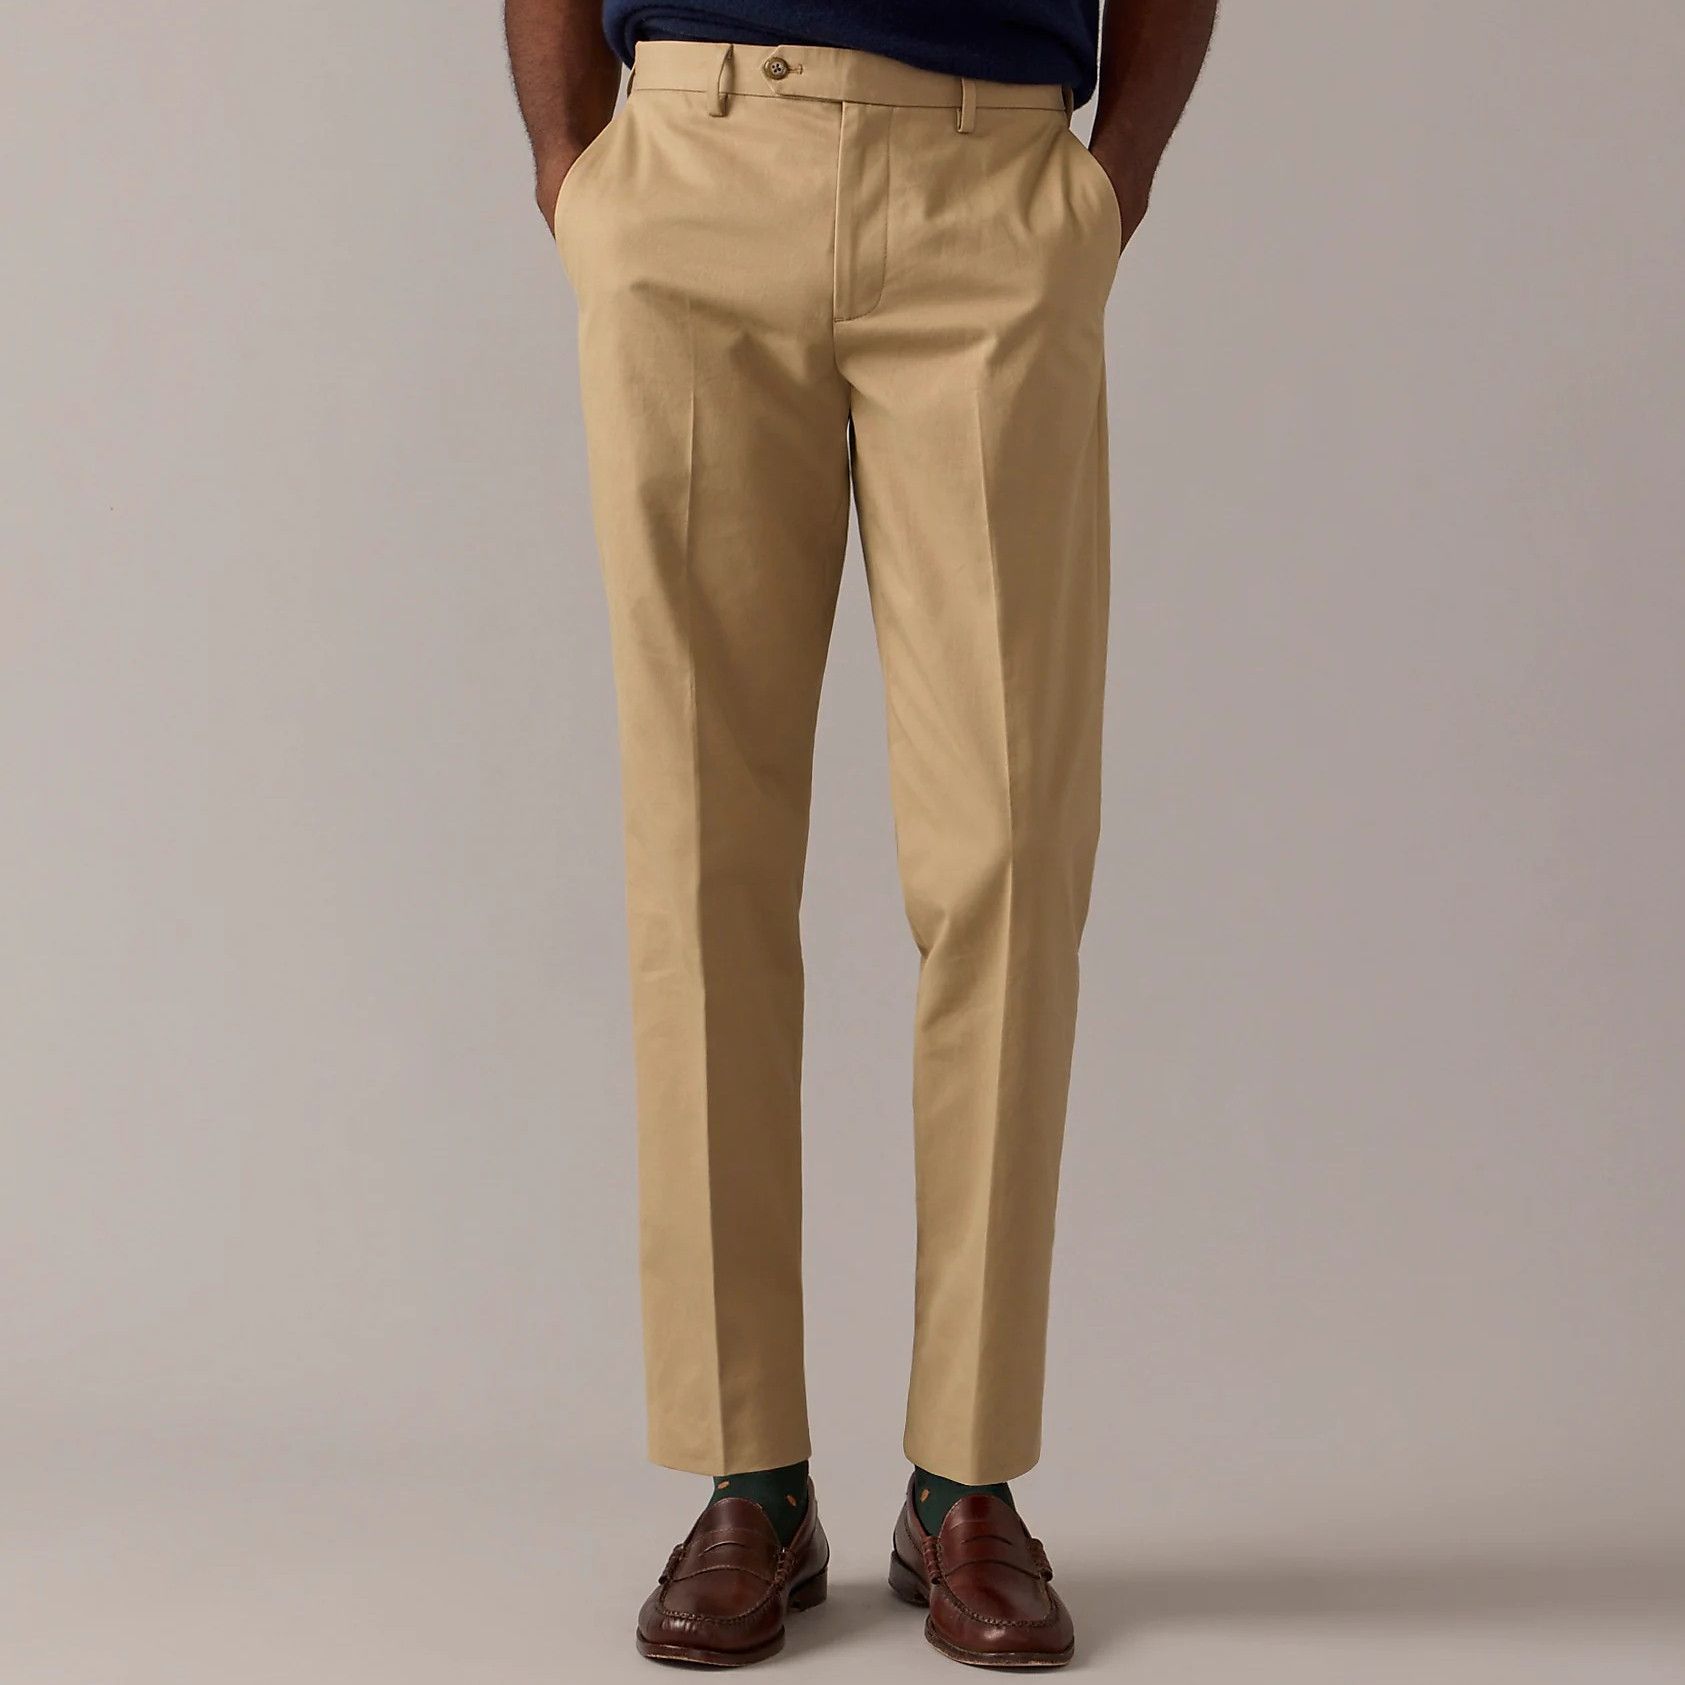 Buy Men's Cotton Narrow-Bottom Stretchable Dress Pants (Chinos) Pack of 2  Online in Pakistan